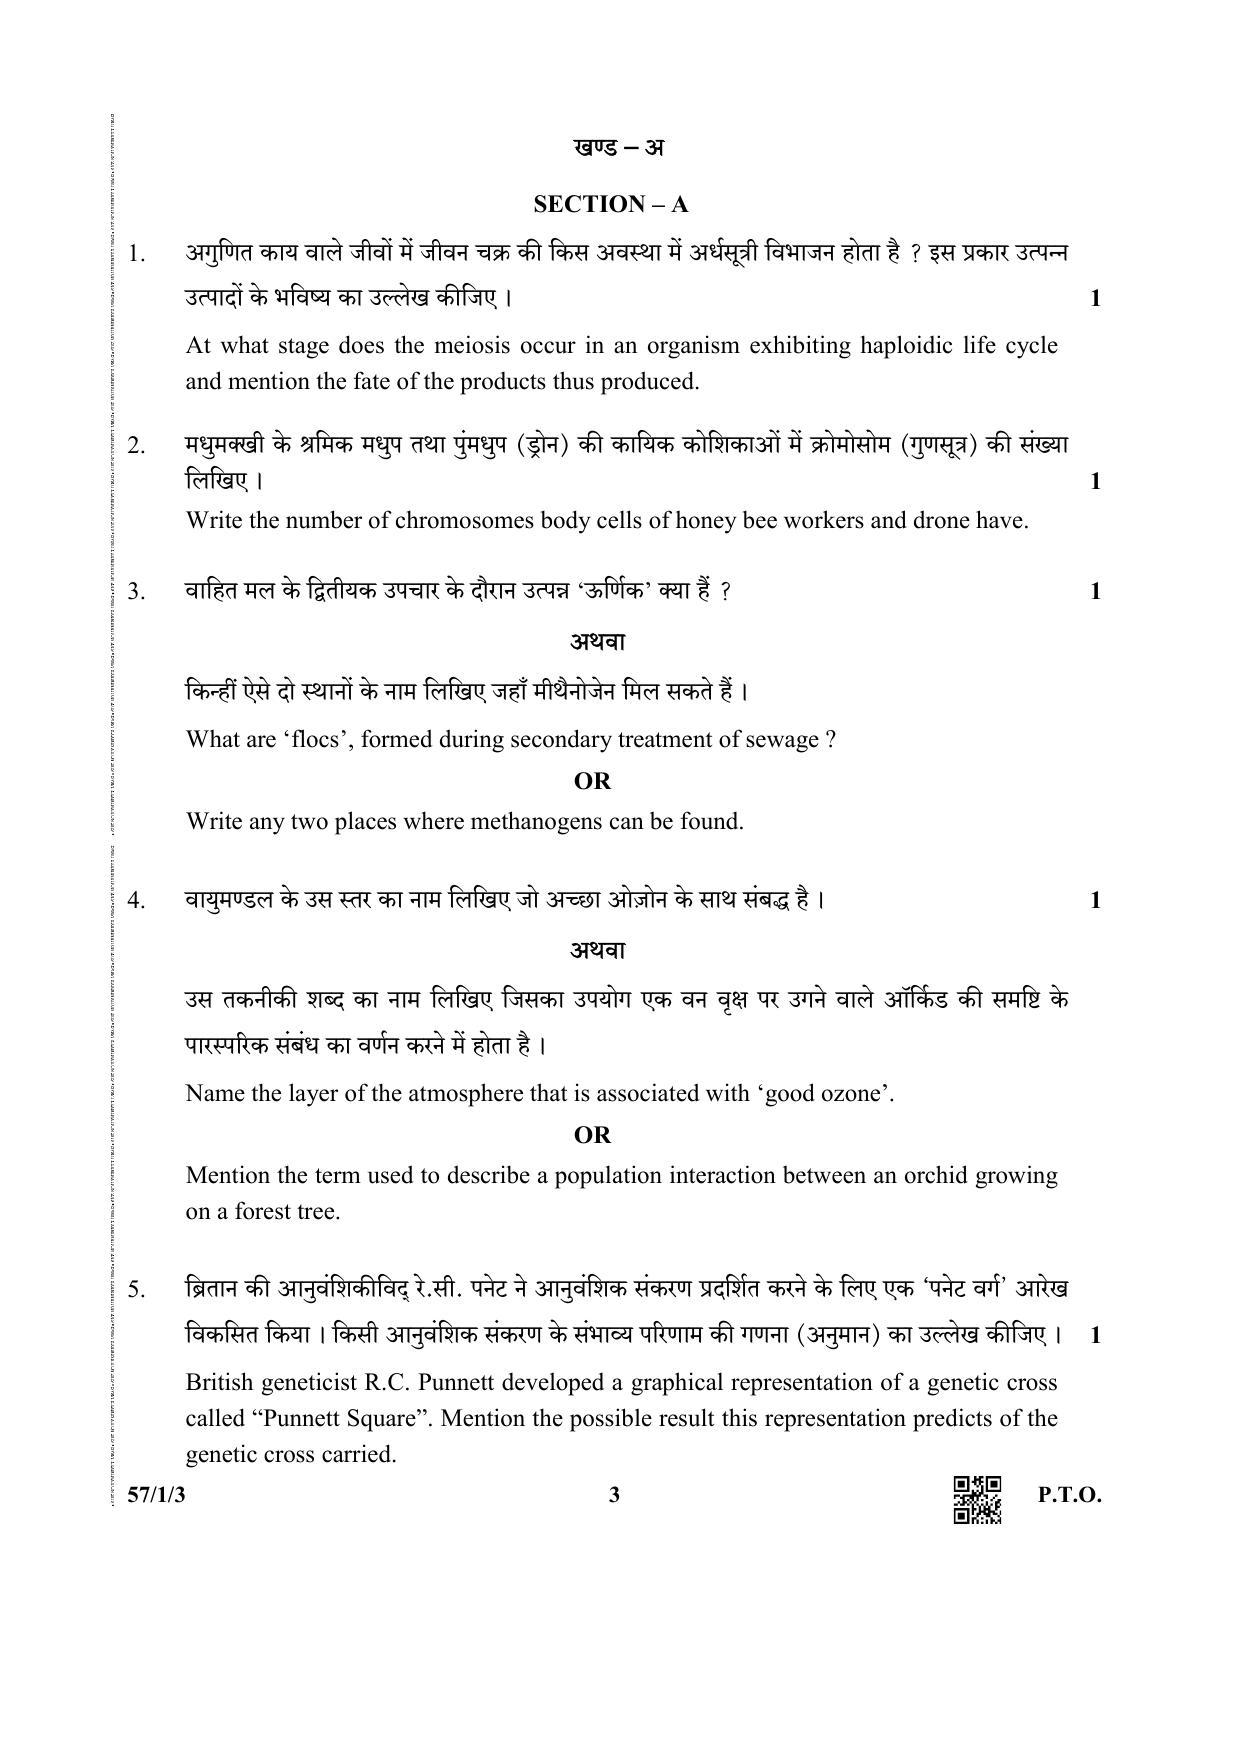 CBSE Class 12 57-3 (Biology) 2019 Question Paper - Page 3